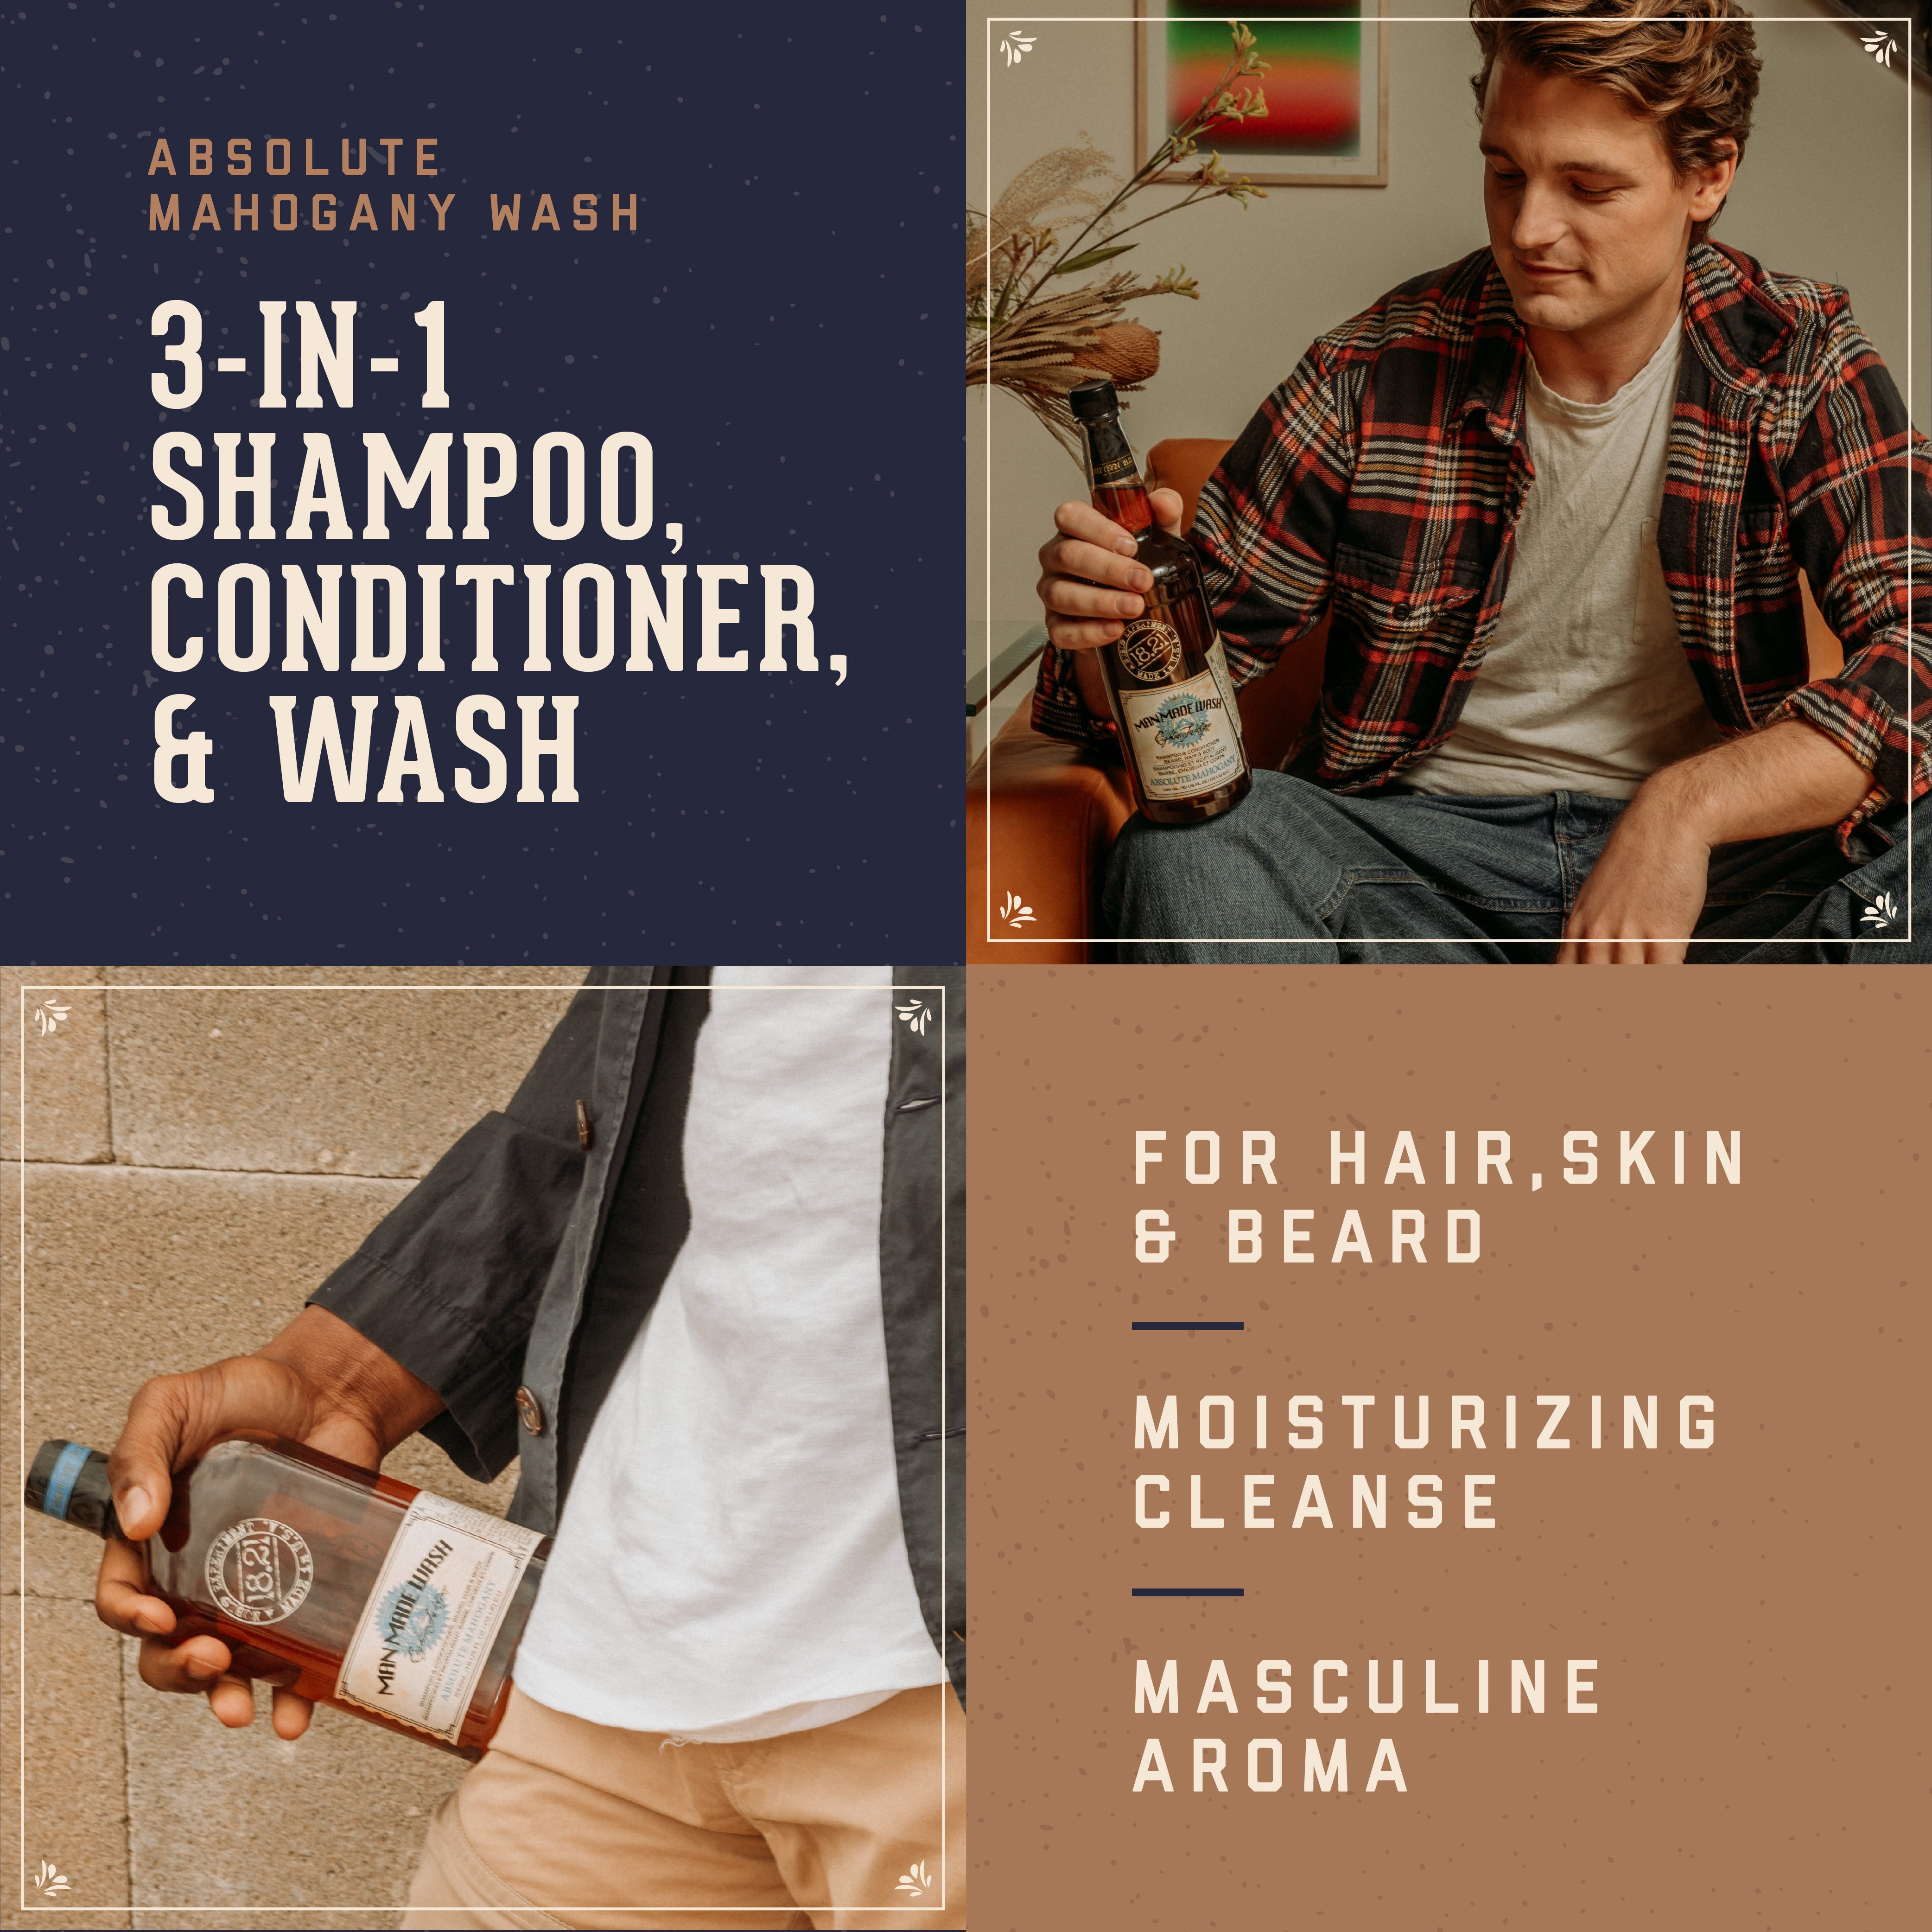 18.21 Man Made Absolute Mahogany Wash benefits:  3-in-1 Shampoo, conditioner and wash for hair, skin and beard. Moisturizing cleanse, masculine aroma